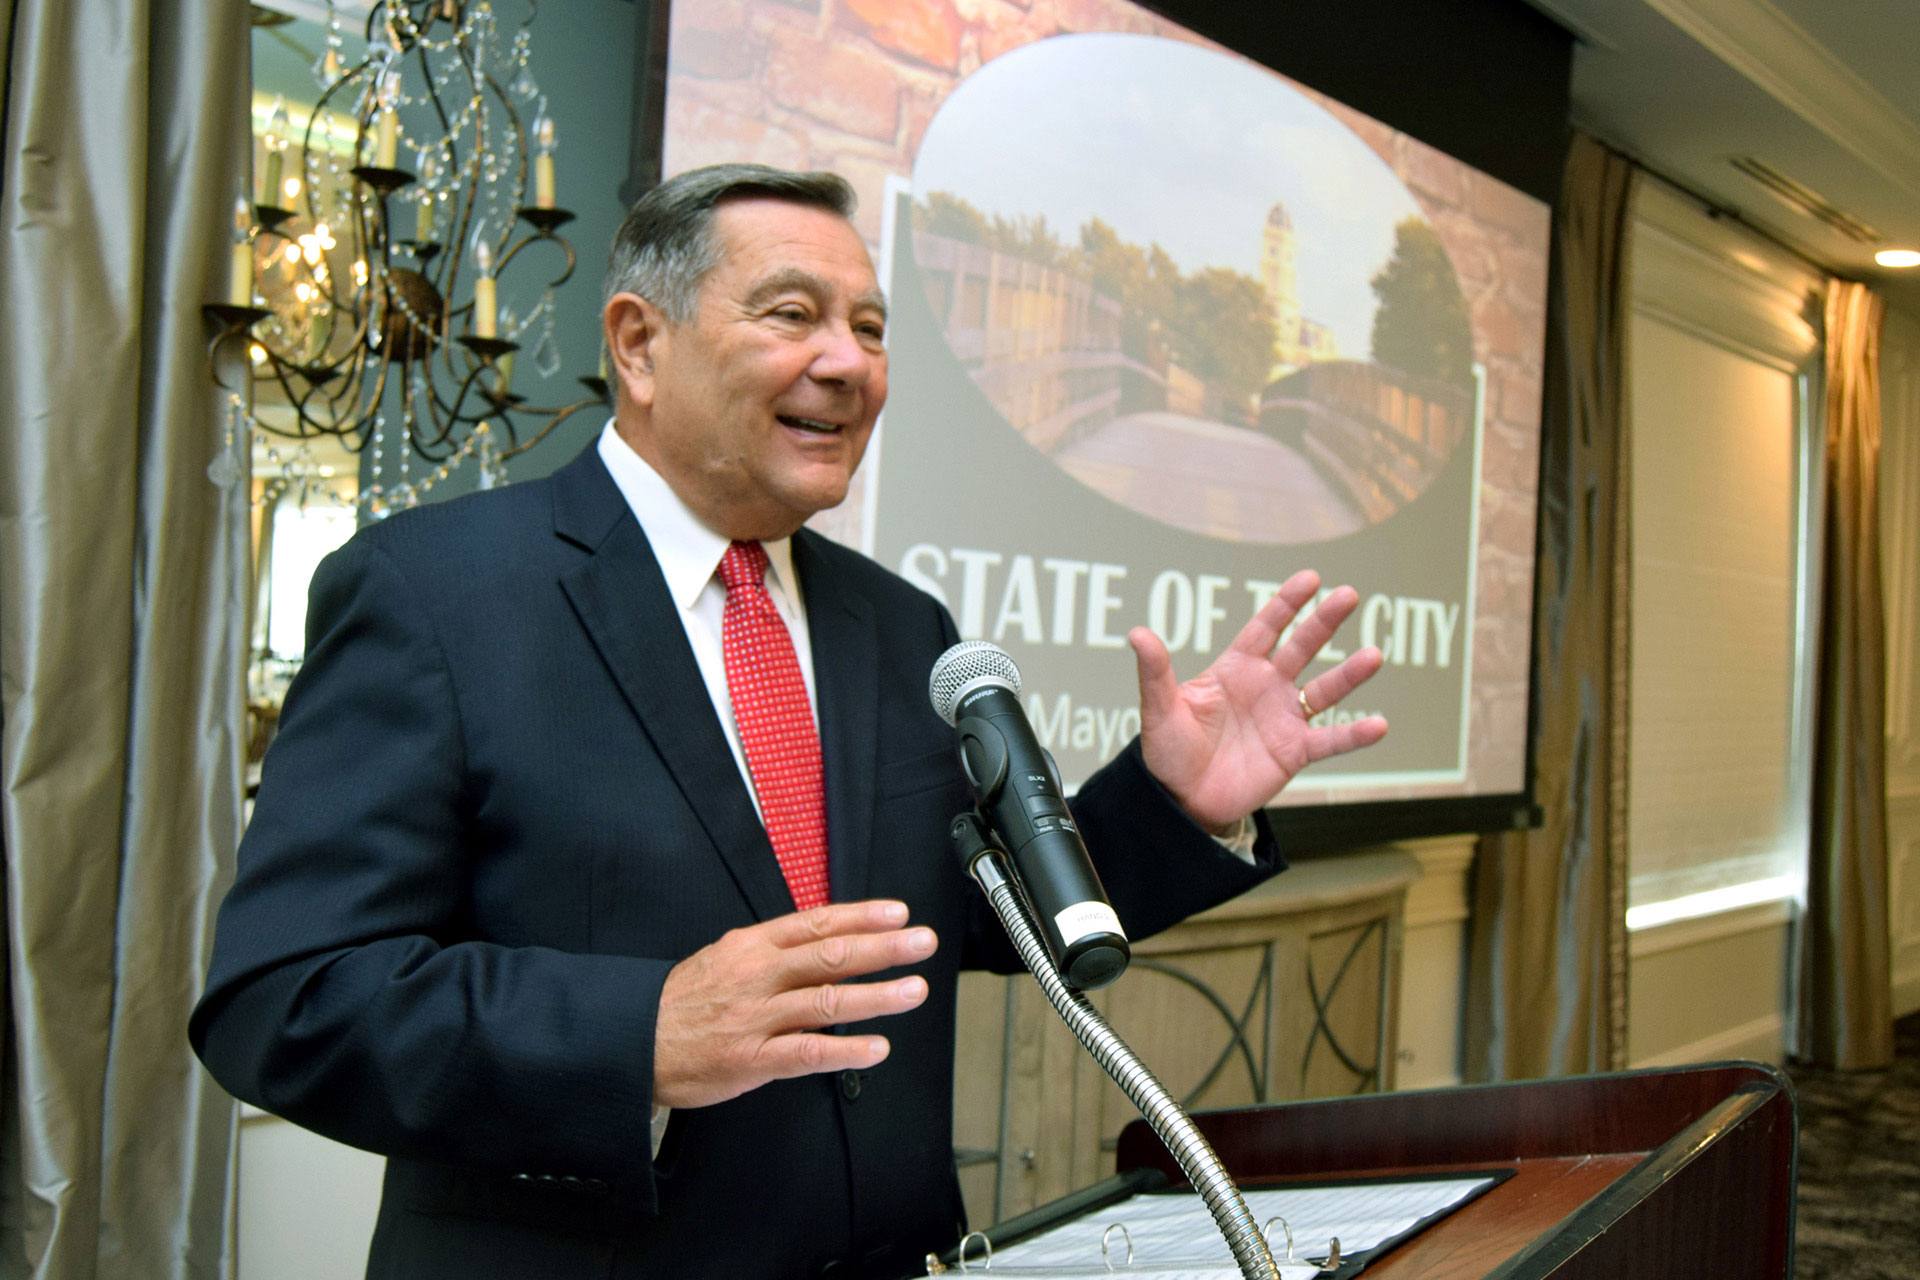 Mayor Ditslear Delivers 2017 Annual ‘State of the City’ Address